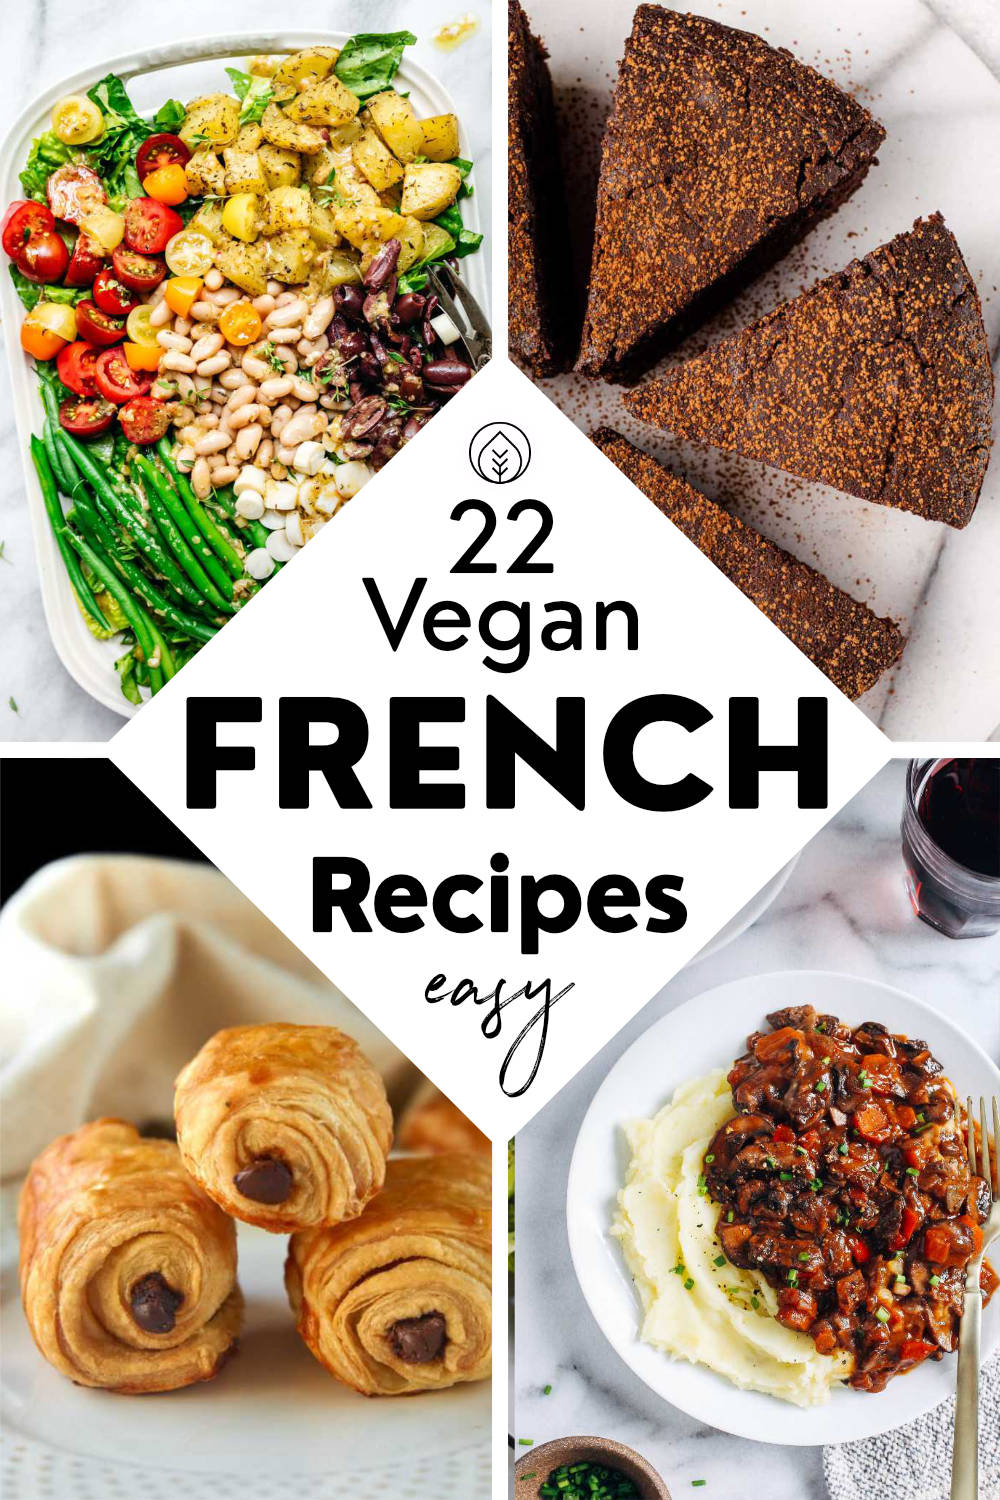 French food, French meals, vegetarian, vegan